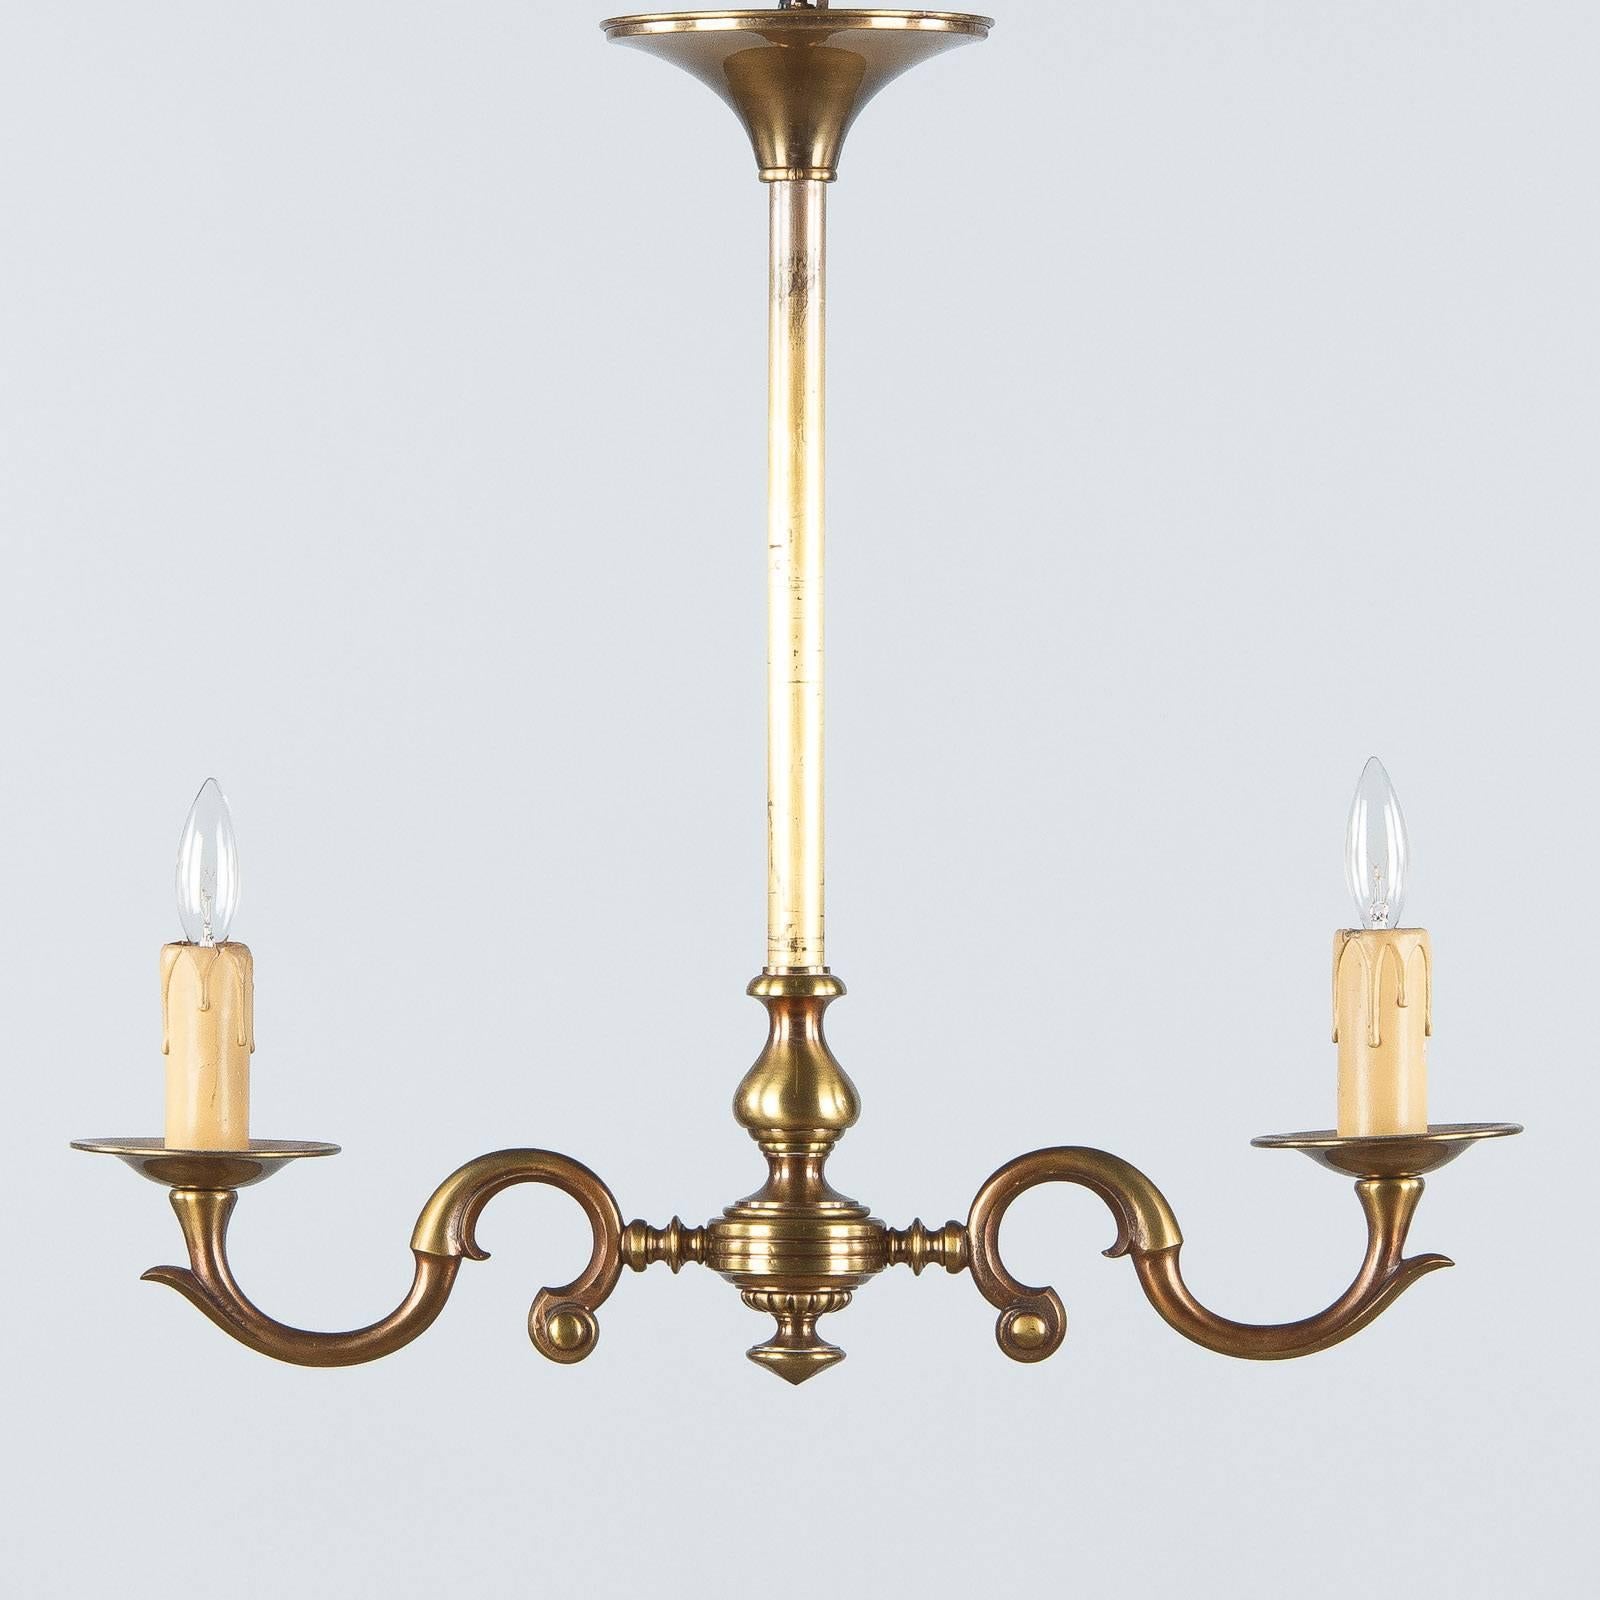 Neoclassical Revival Pair of 1940s French Brass Chandeliers